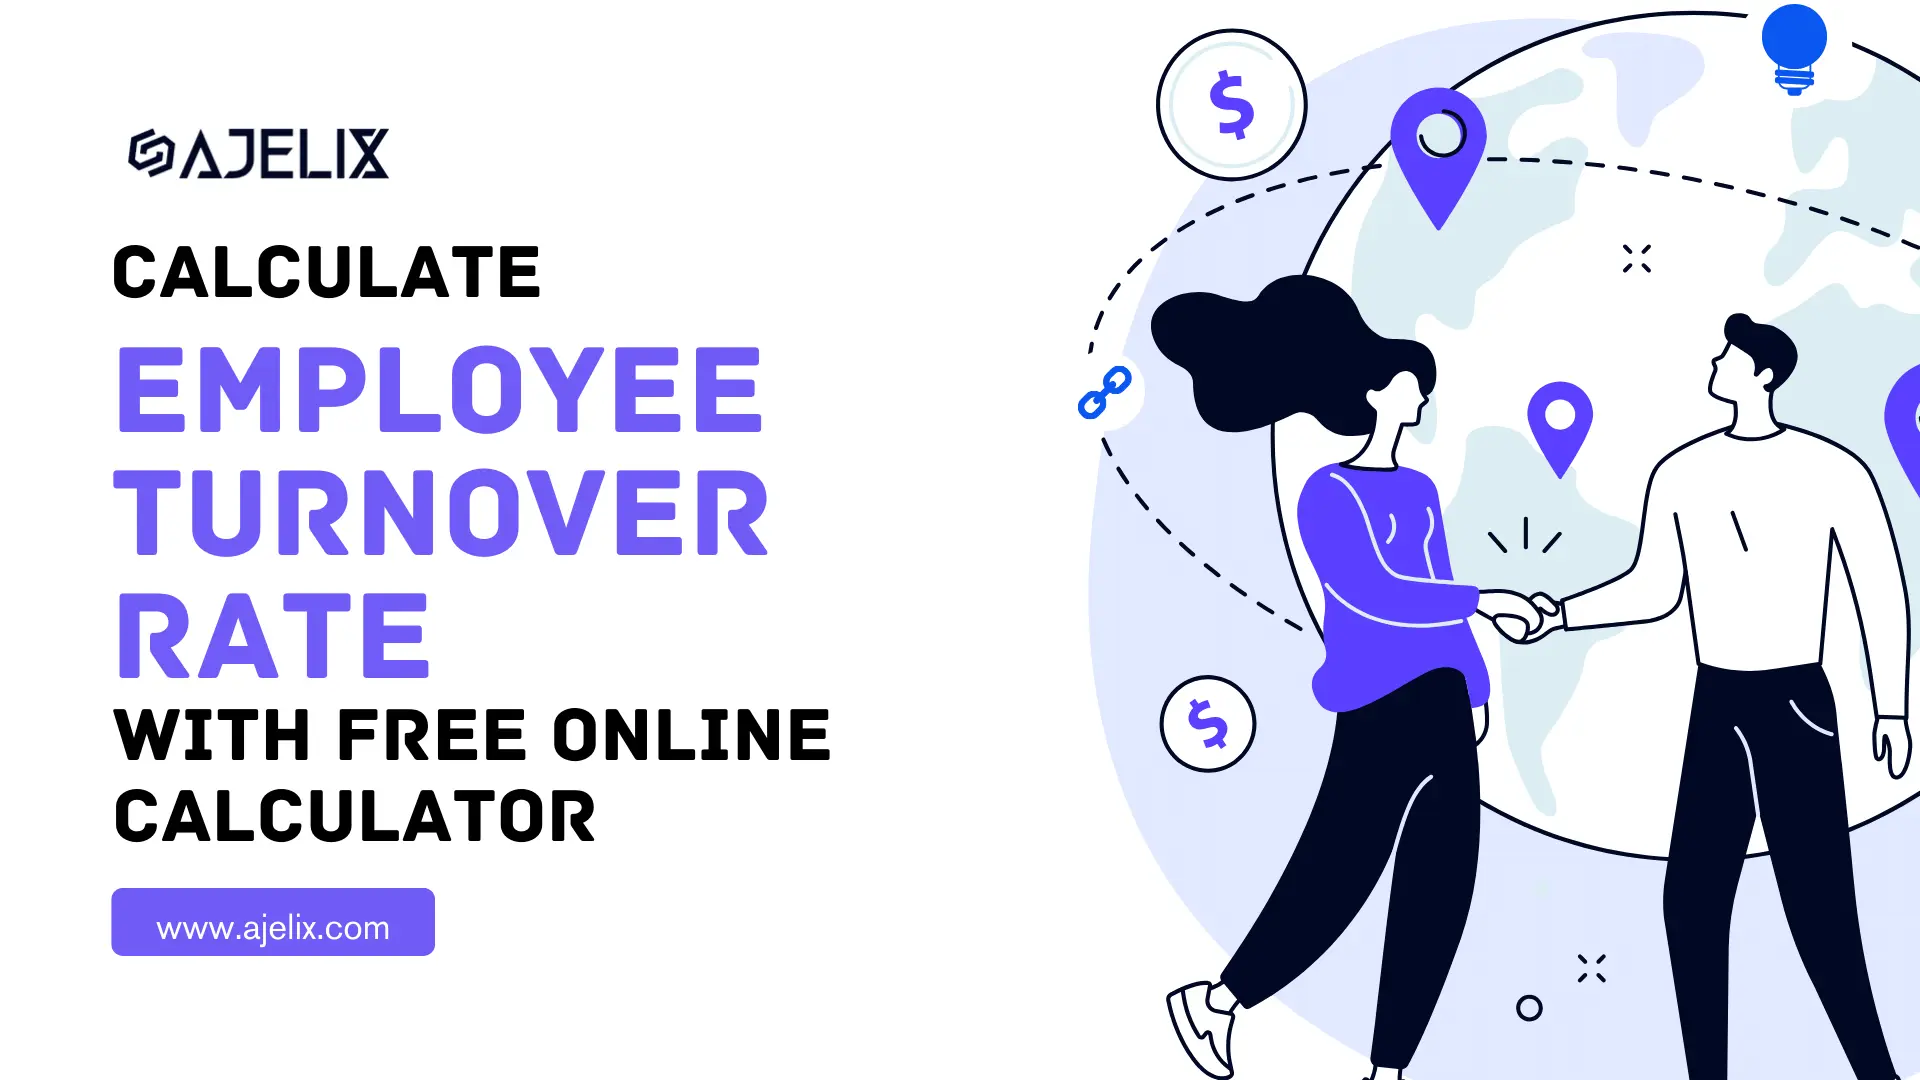 Free Employee Turnover Rate Calculator Online